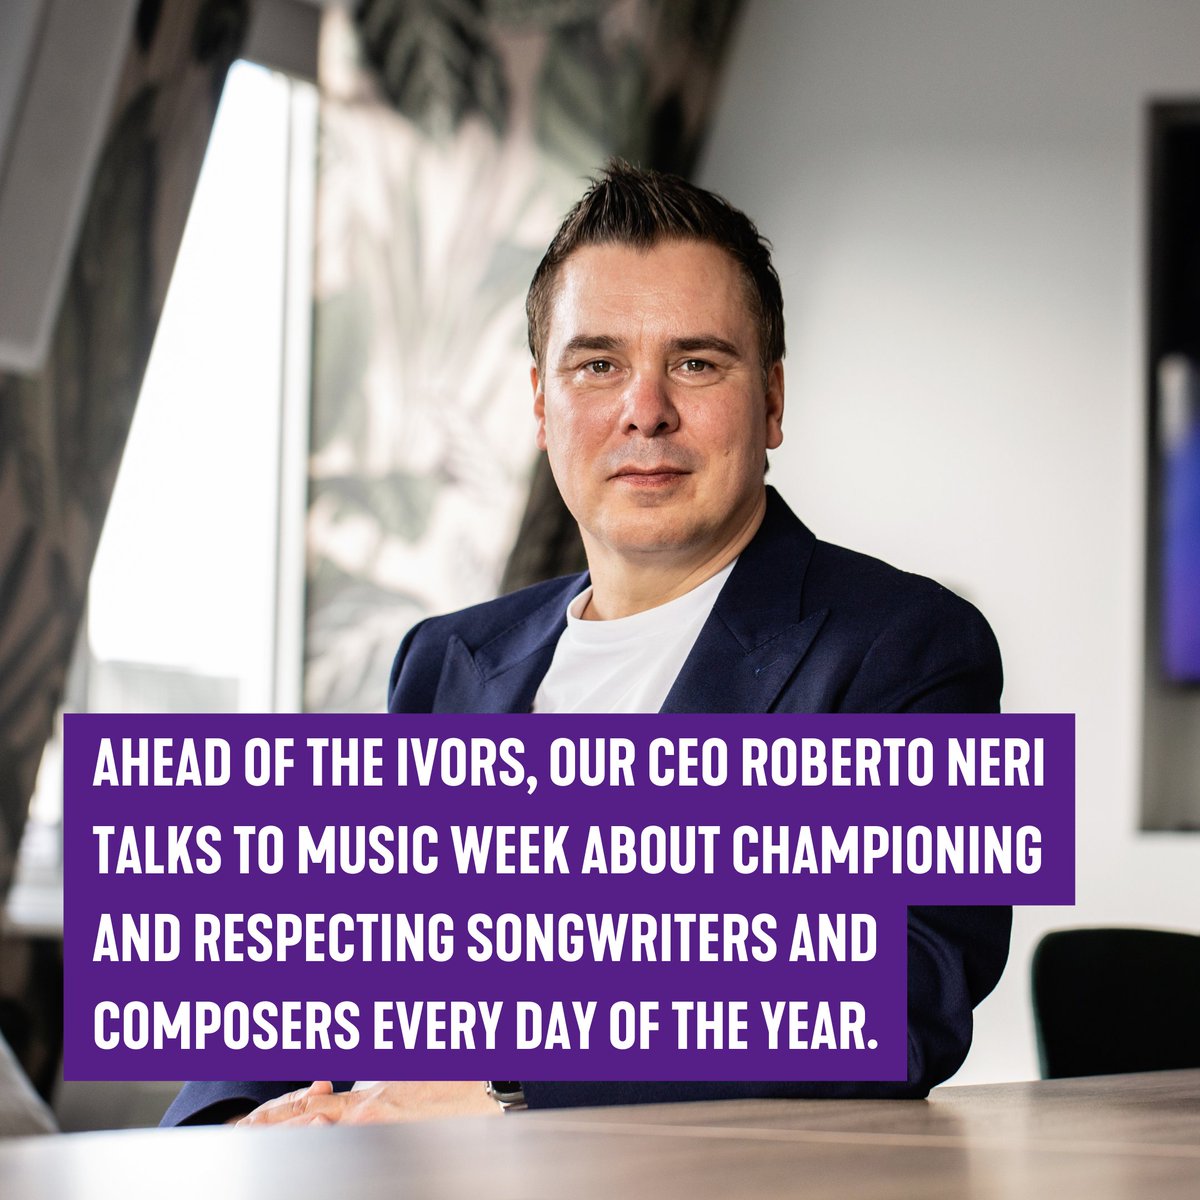 “At the Ivors Academy, we're not compromised: we don't own assets, we don't represent assets, we represent the songwriter and composer, and our job is only to focus on them.” Ahead of The Ivors, our CEO @RobertoNeri47 talks to @MusicWeek about championing and respecting